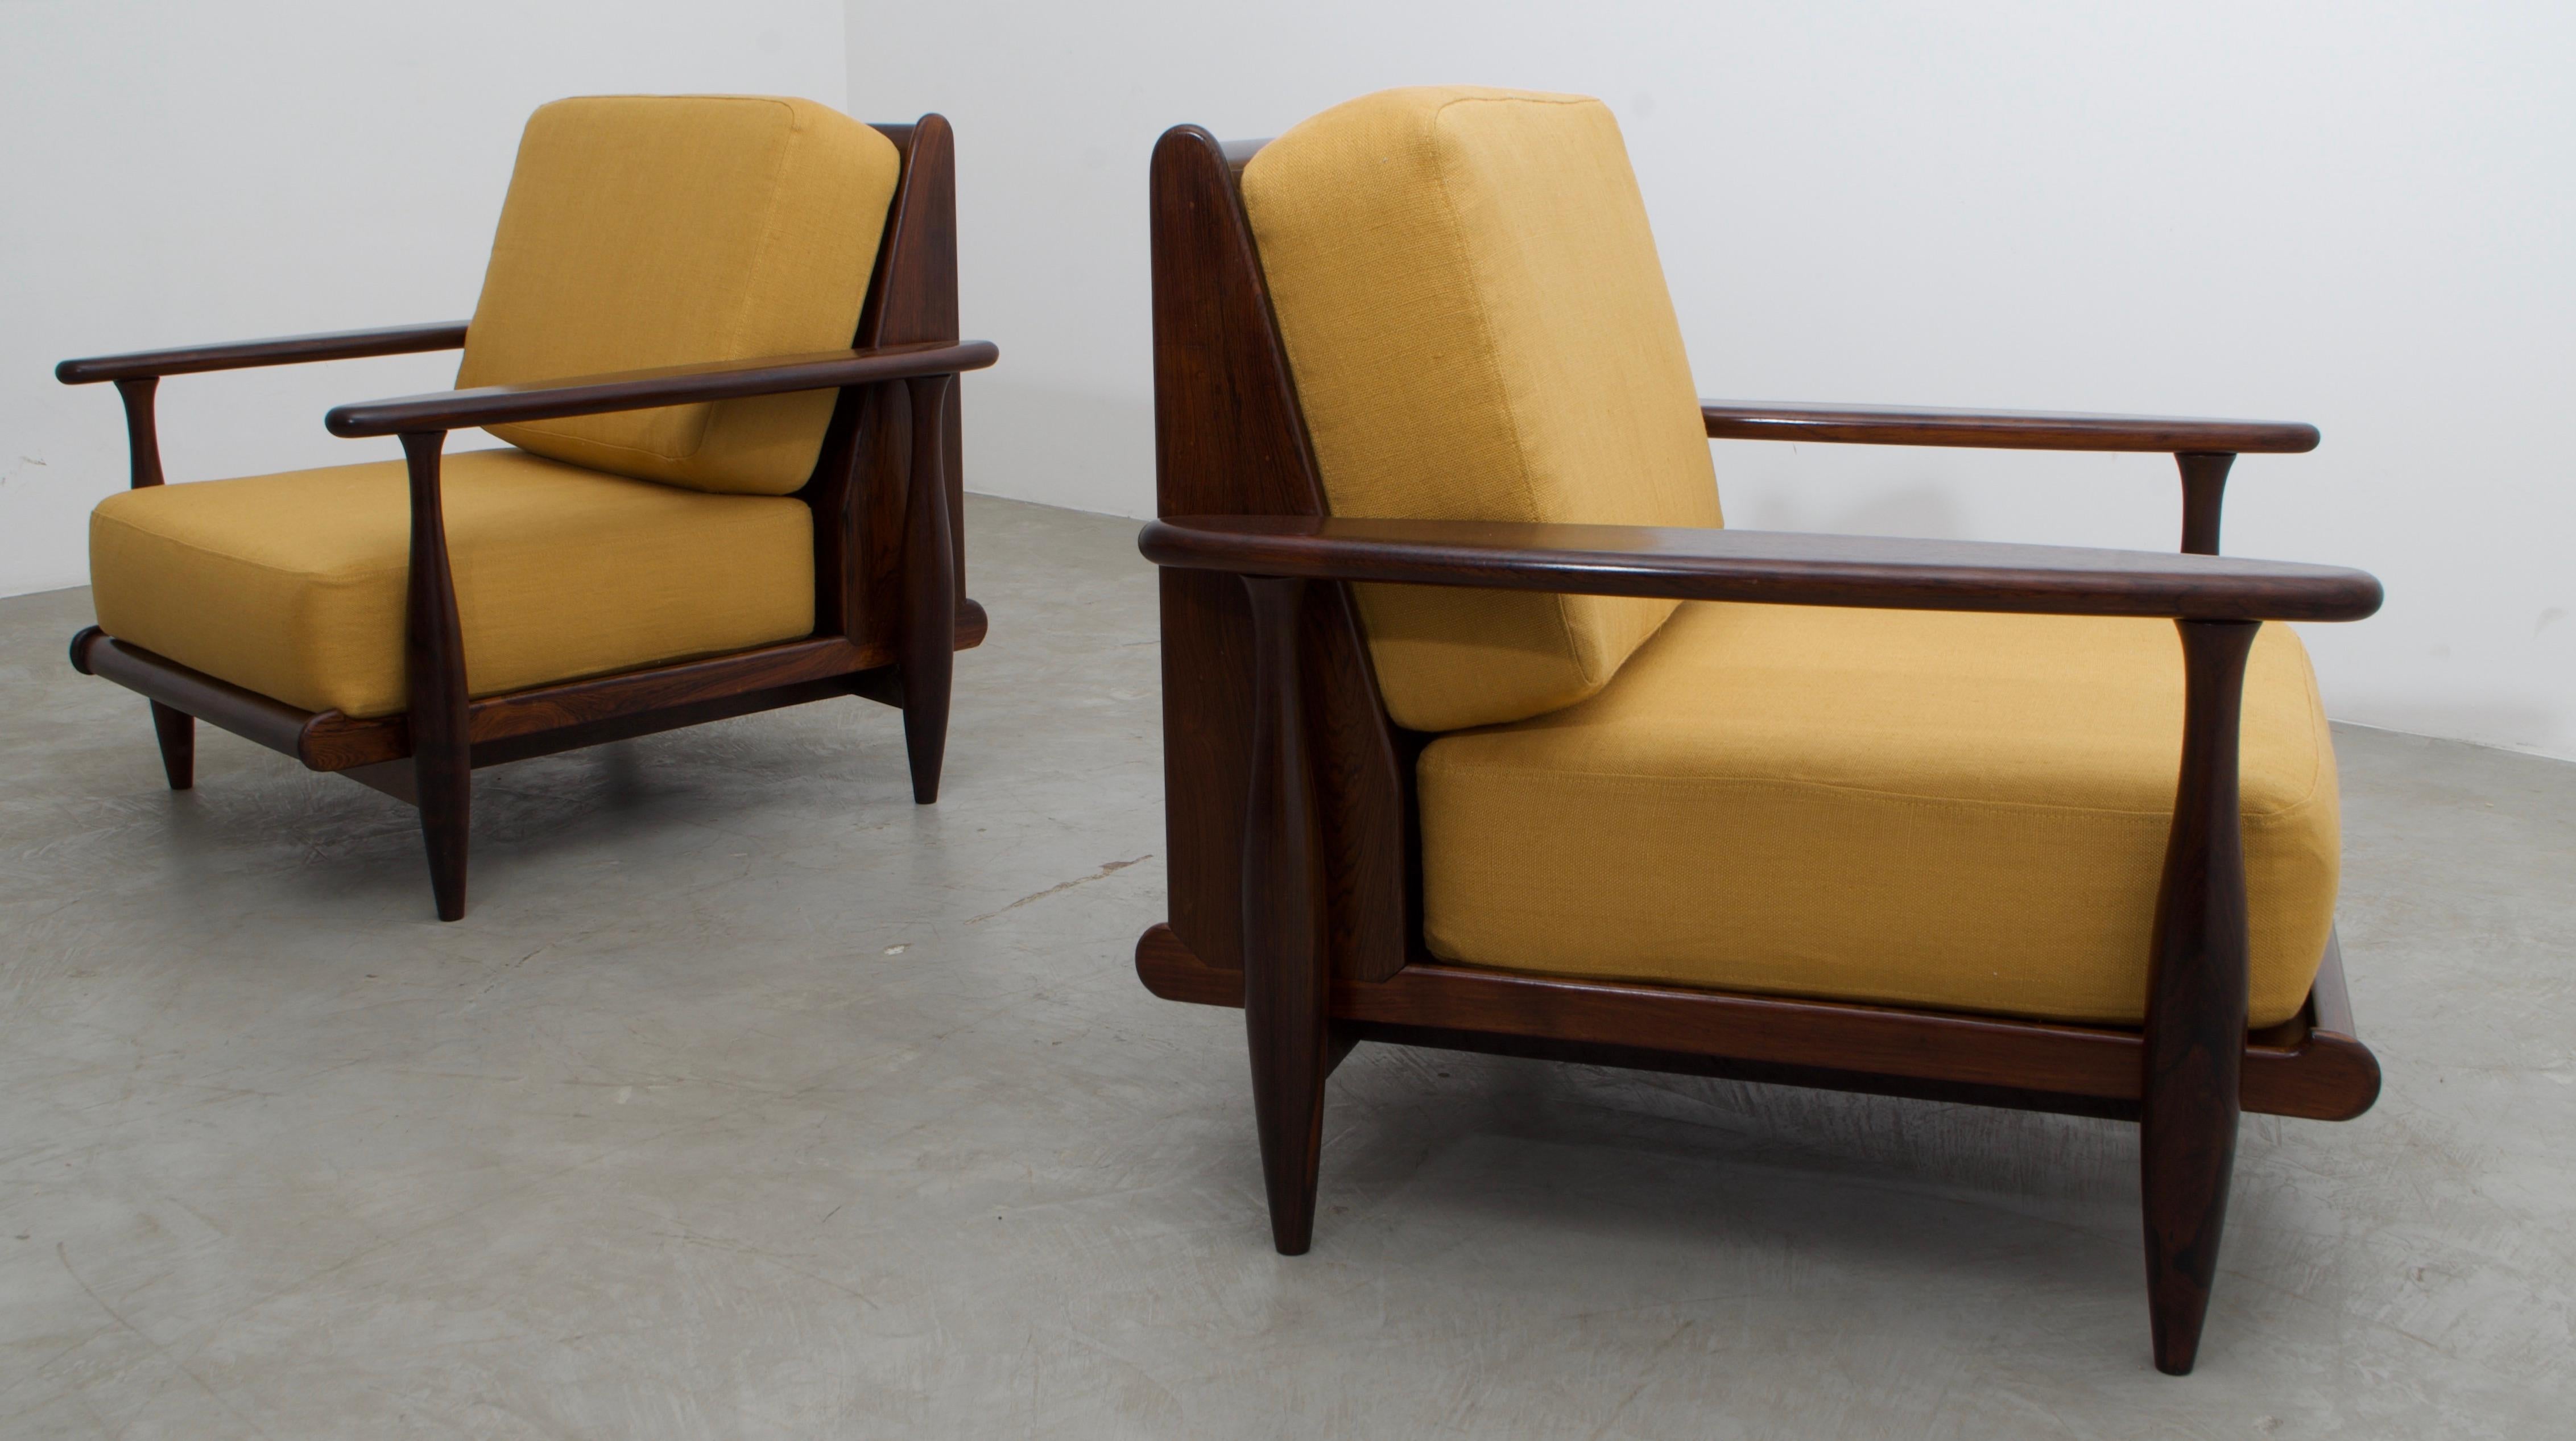 20th Century Pair of Lounge Chairs by Liceu de Artes e Ofícios, 1960's, Brazilian Mid-Century For Sale